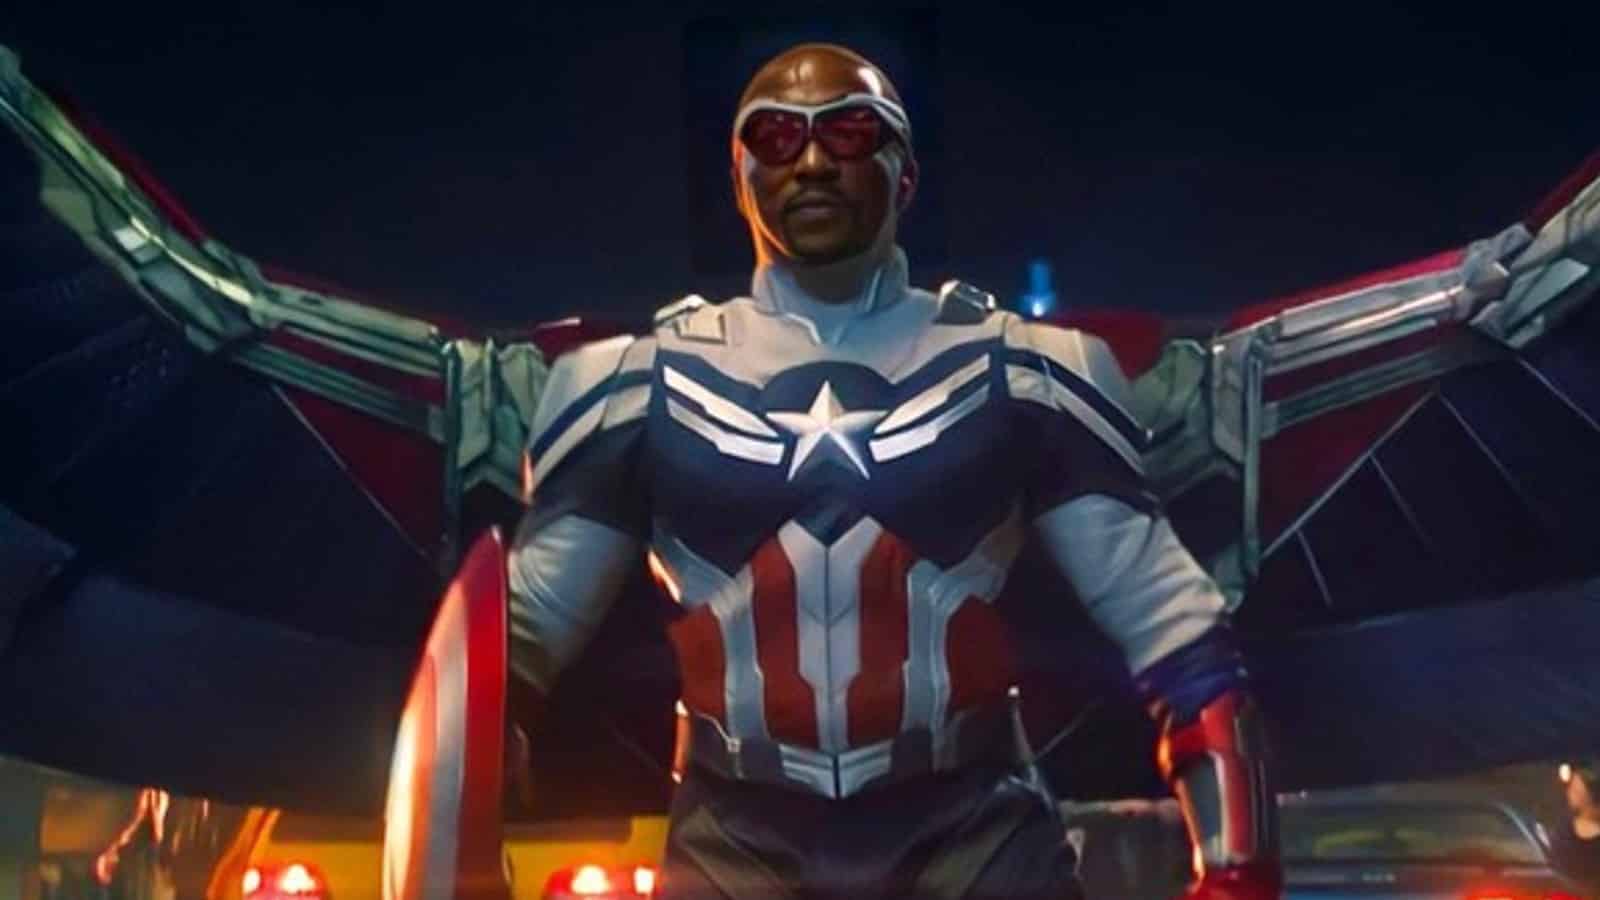 Anthony Mackie will return in Captain America 4